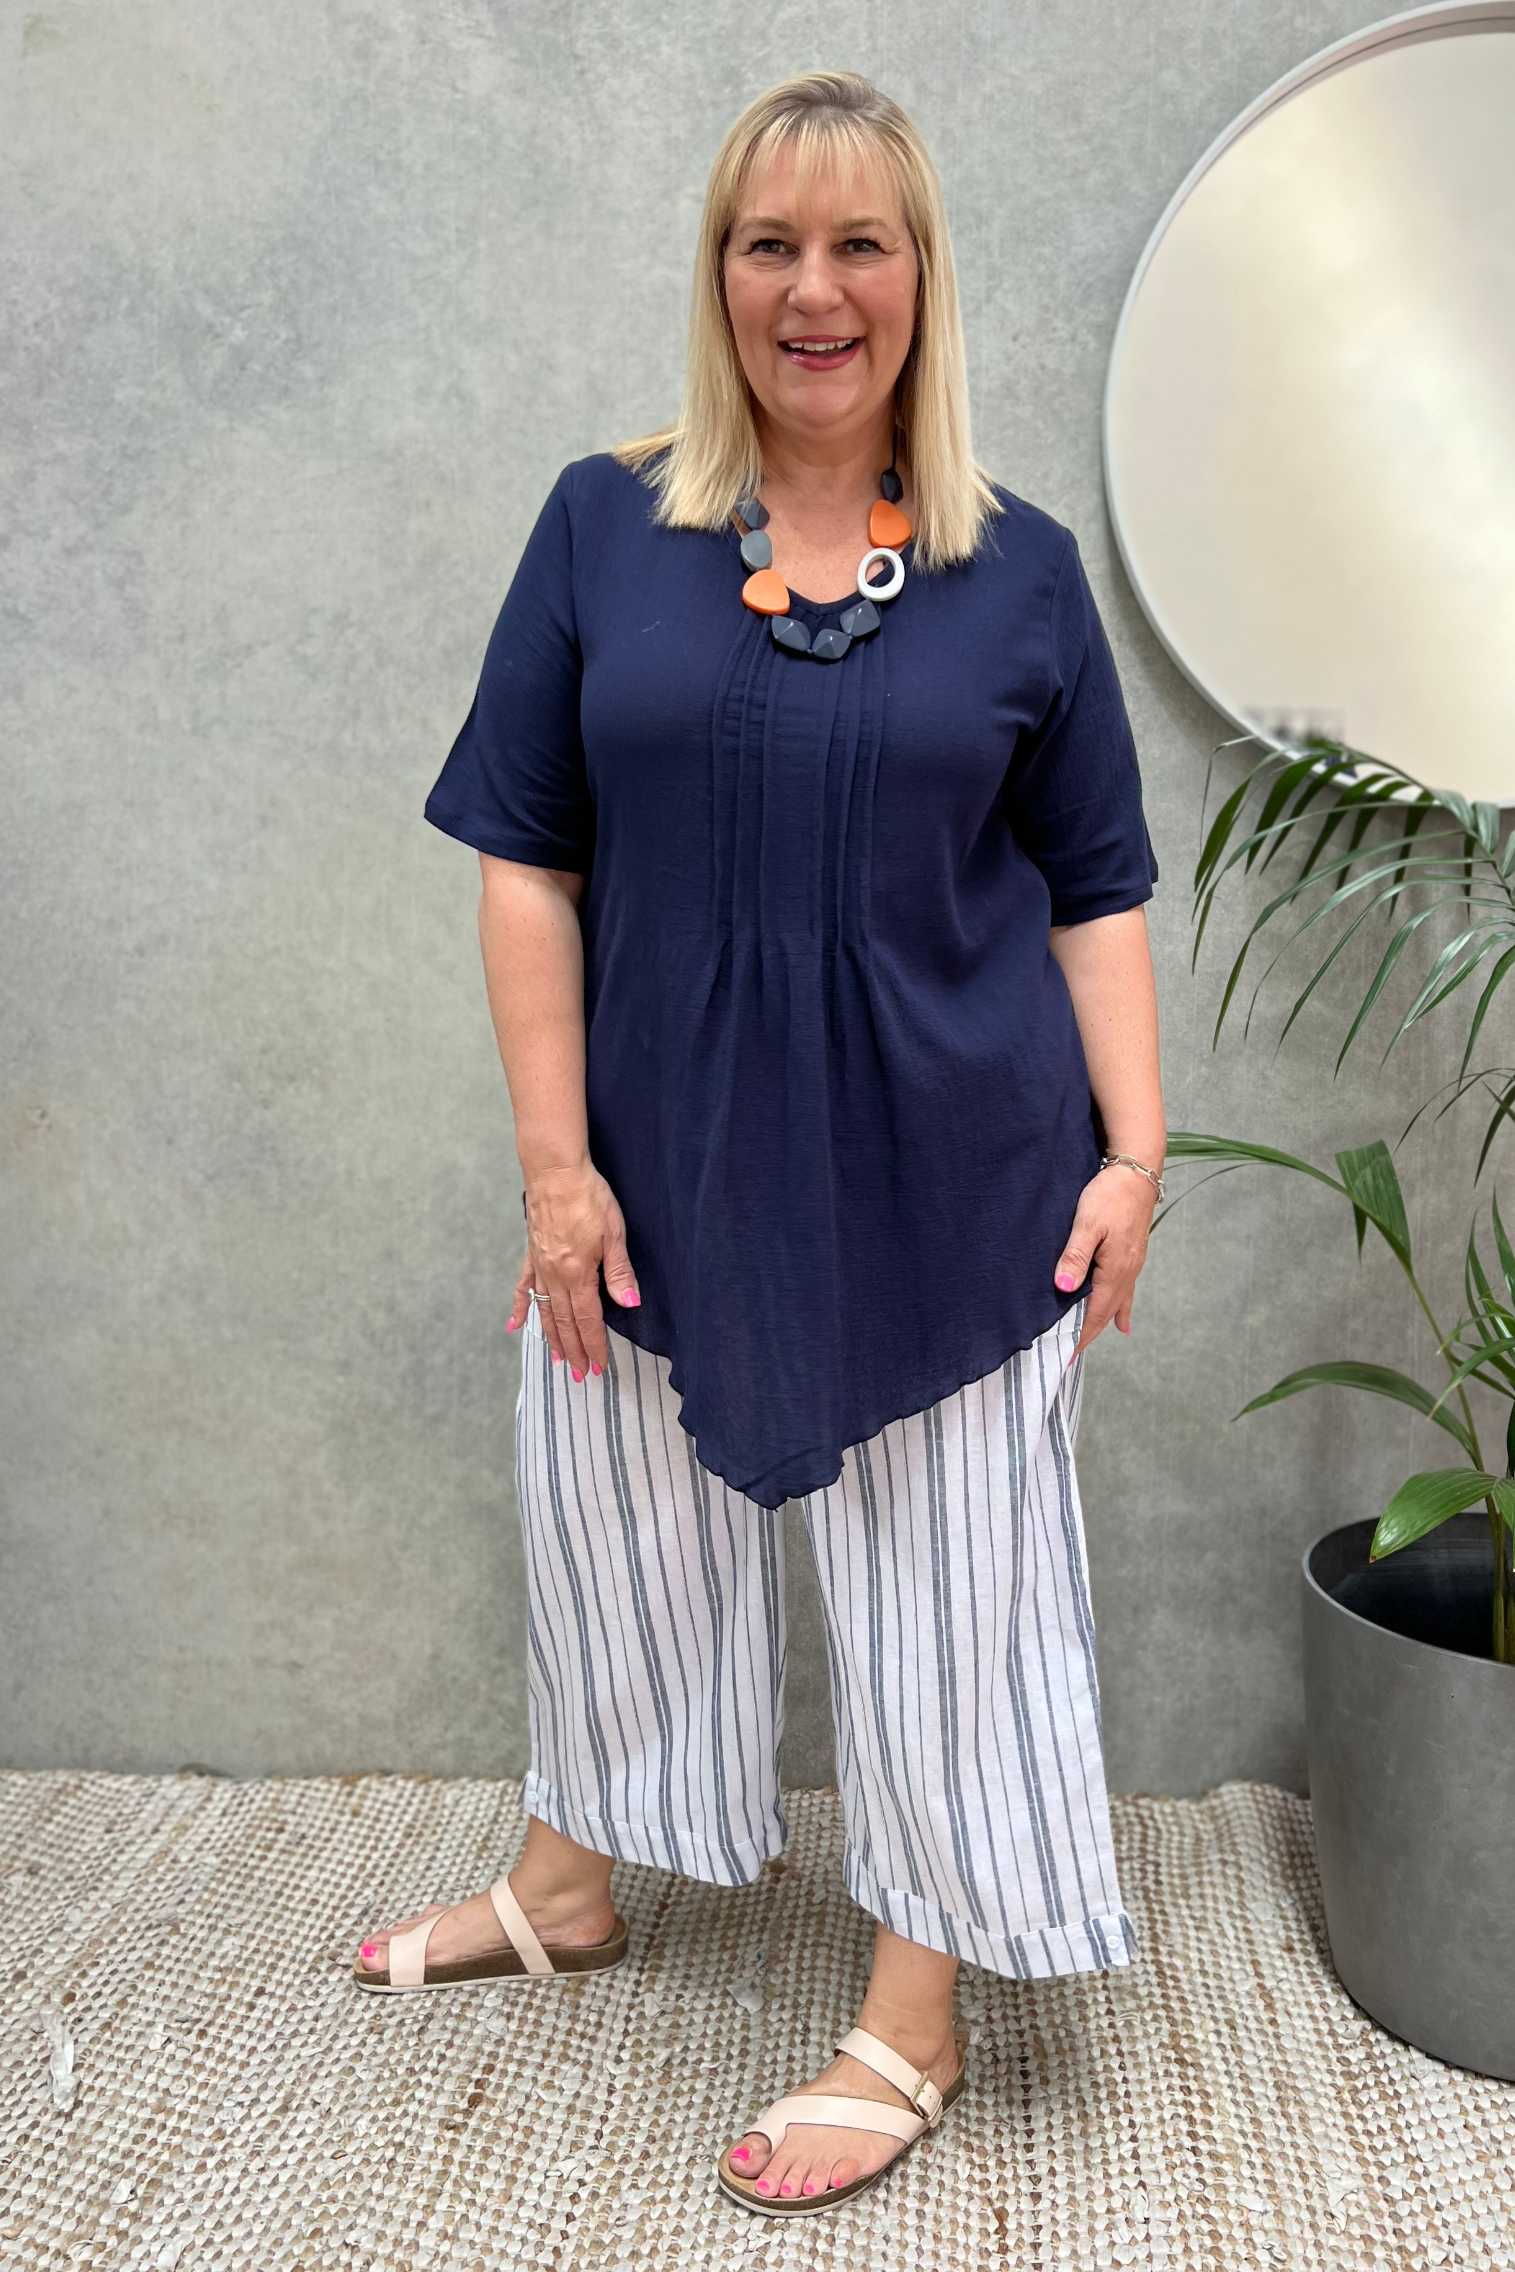 Kita Ku blonde model wearing a navy vee top with pleated front, over a pair of white and navy stripe pants in a retail setting.